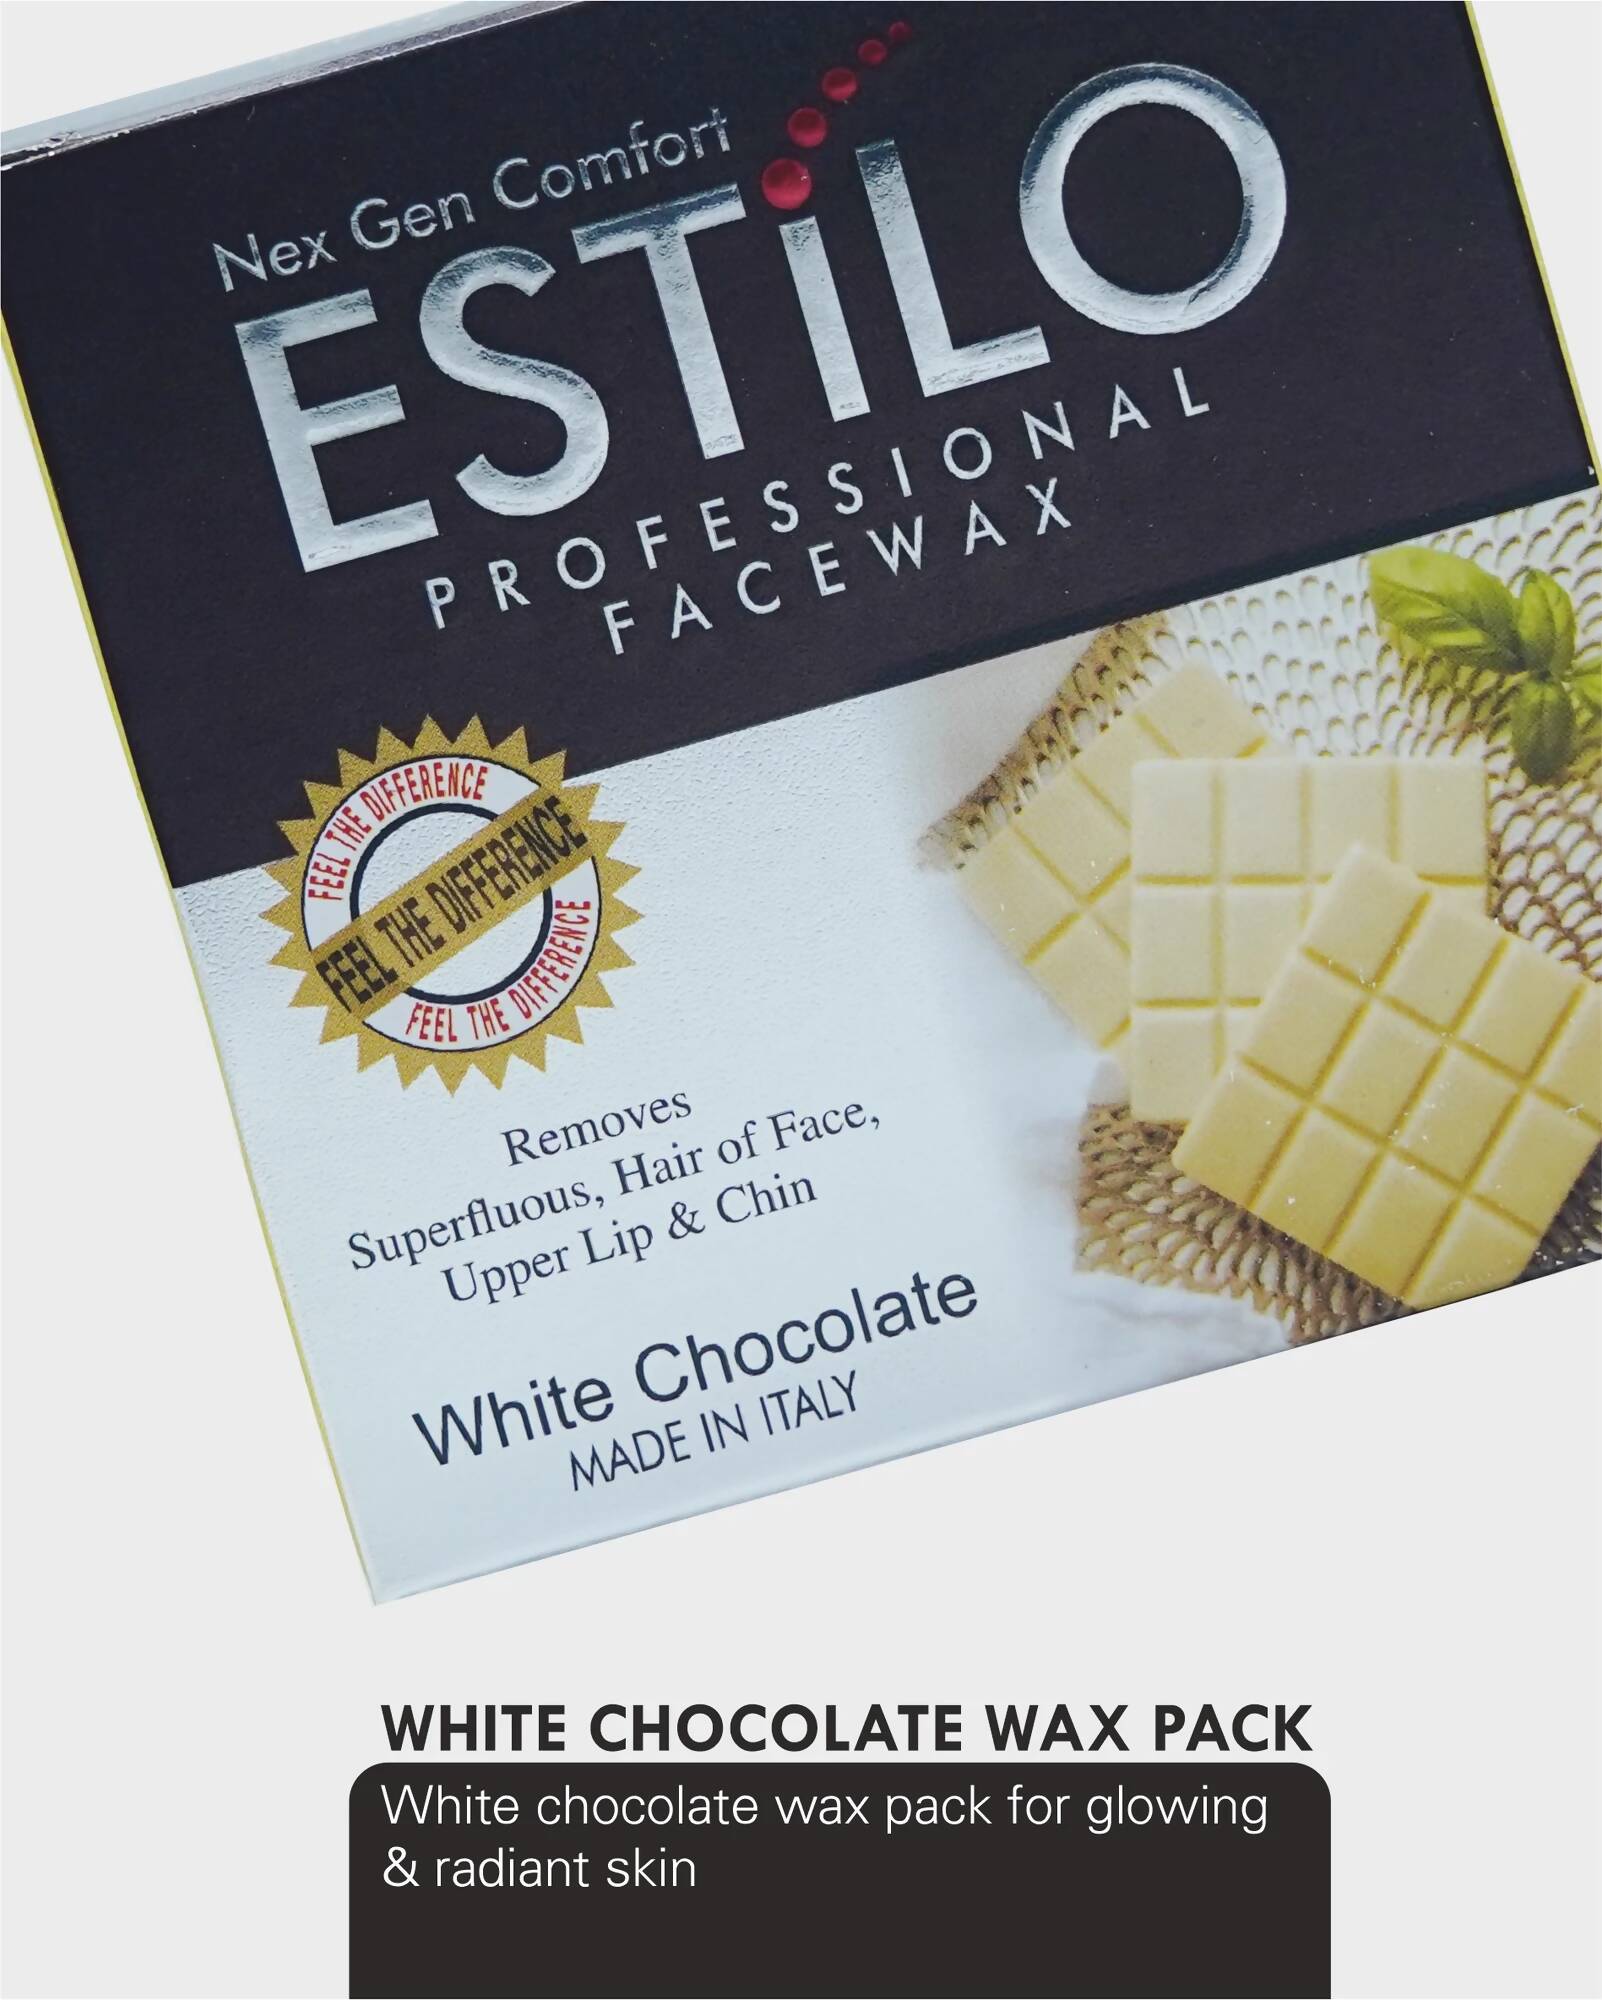 showing packaging of estilo white chocolate face wax